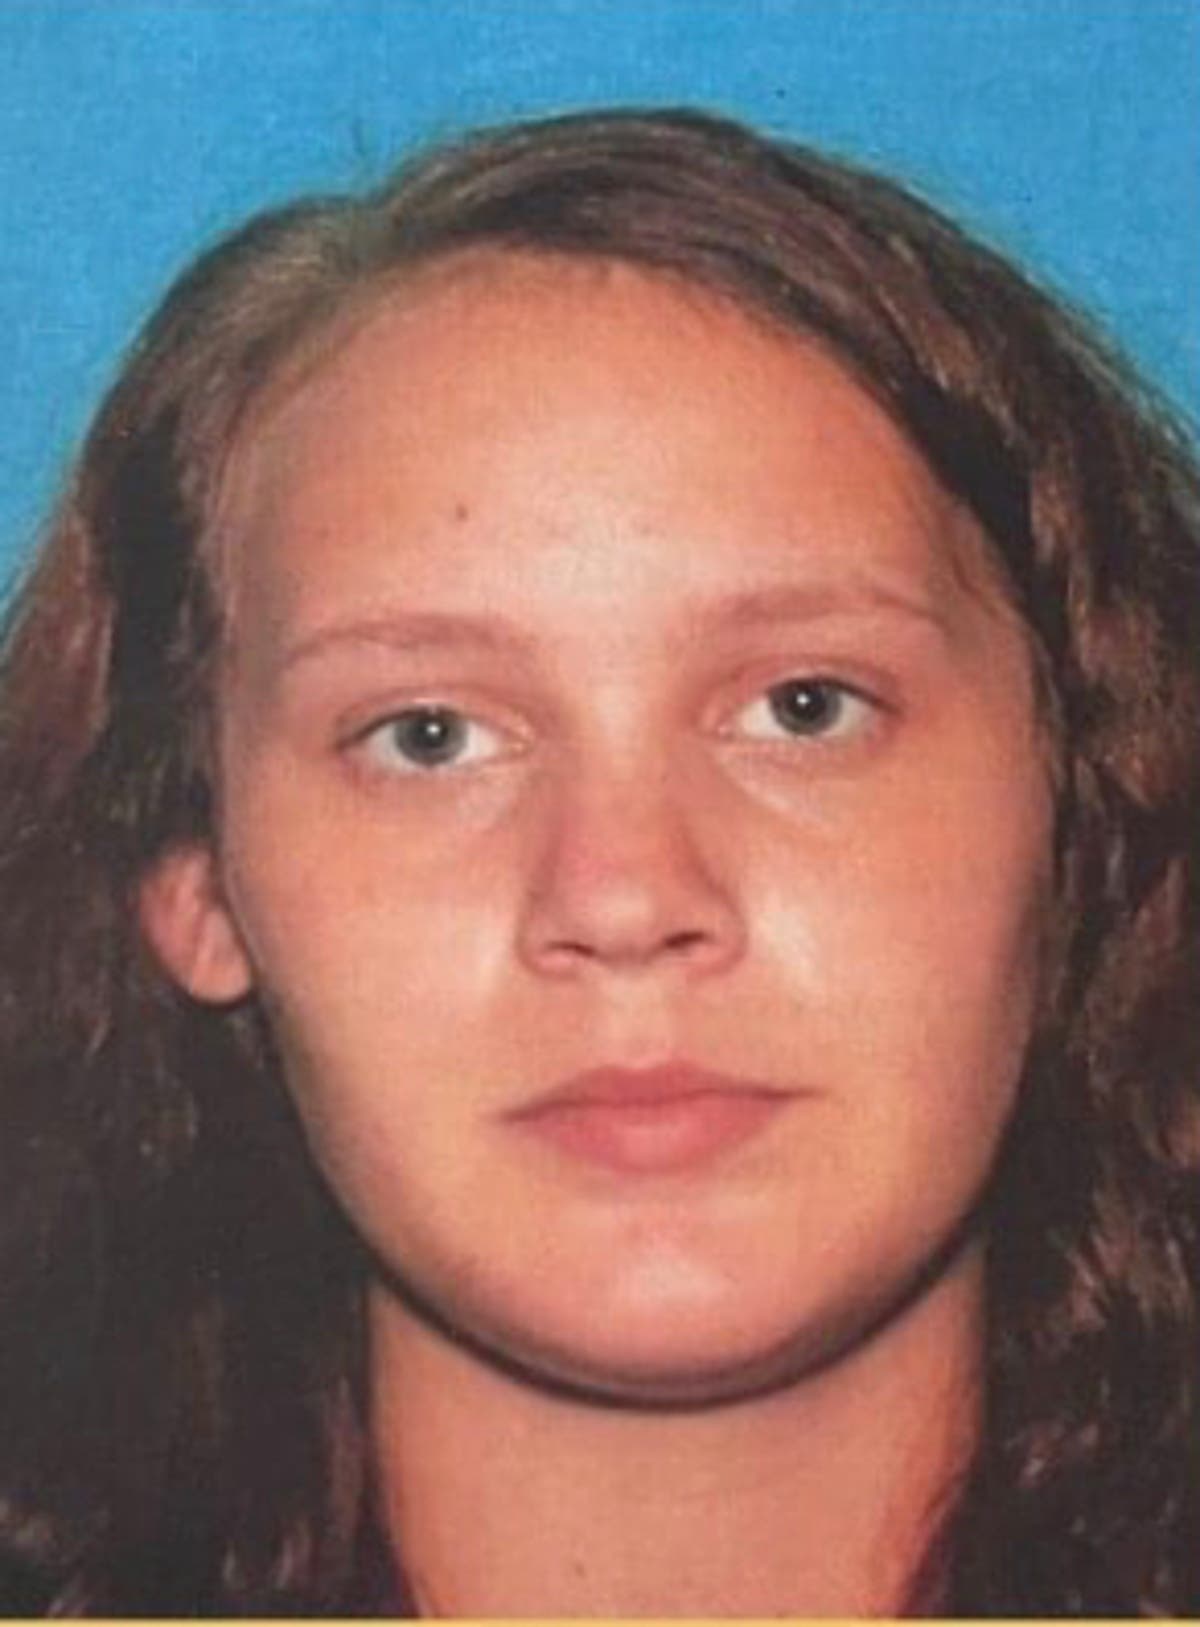 Mississippi woman charged with capital murder for allegedly throwing baby onto road